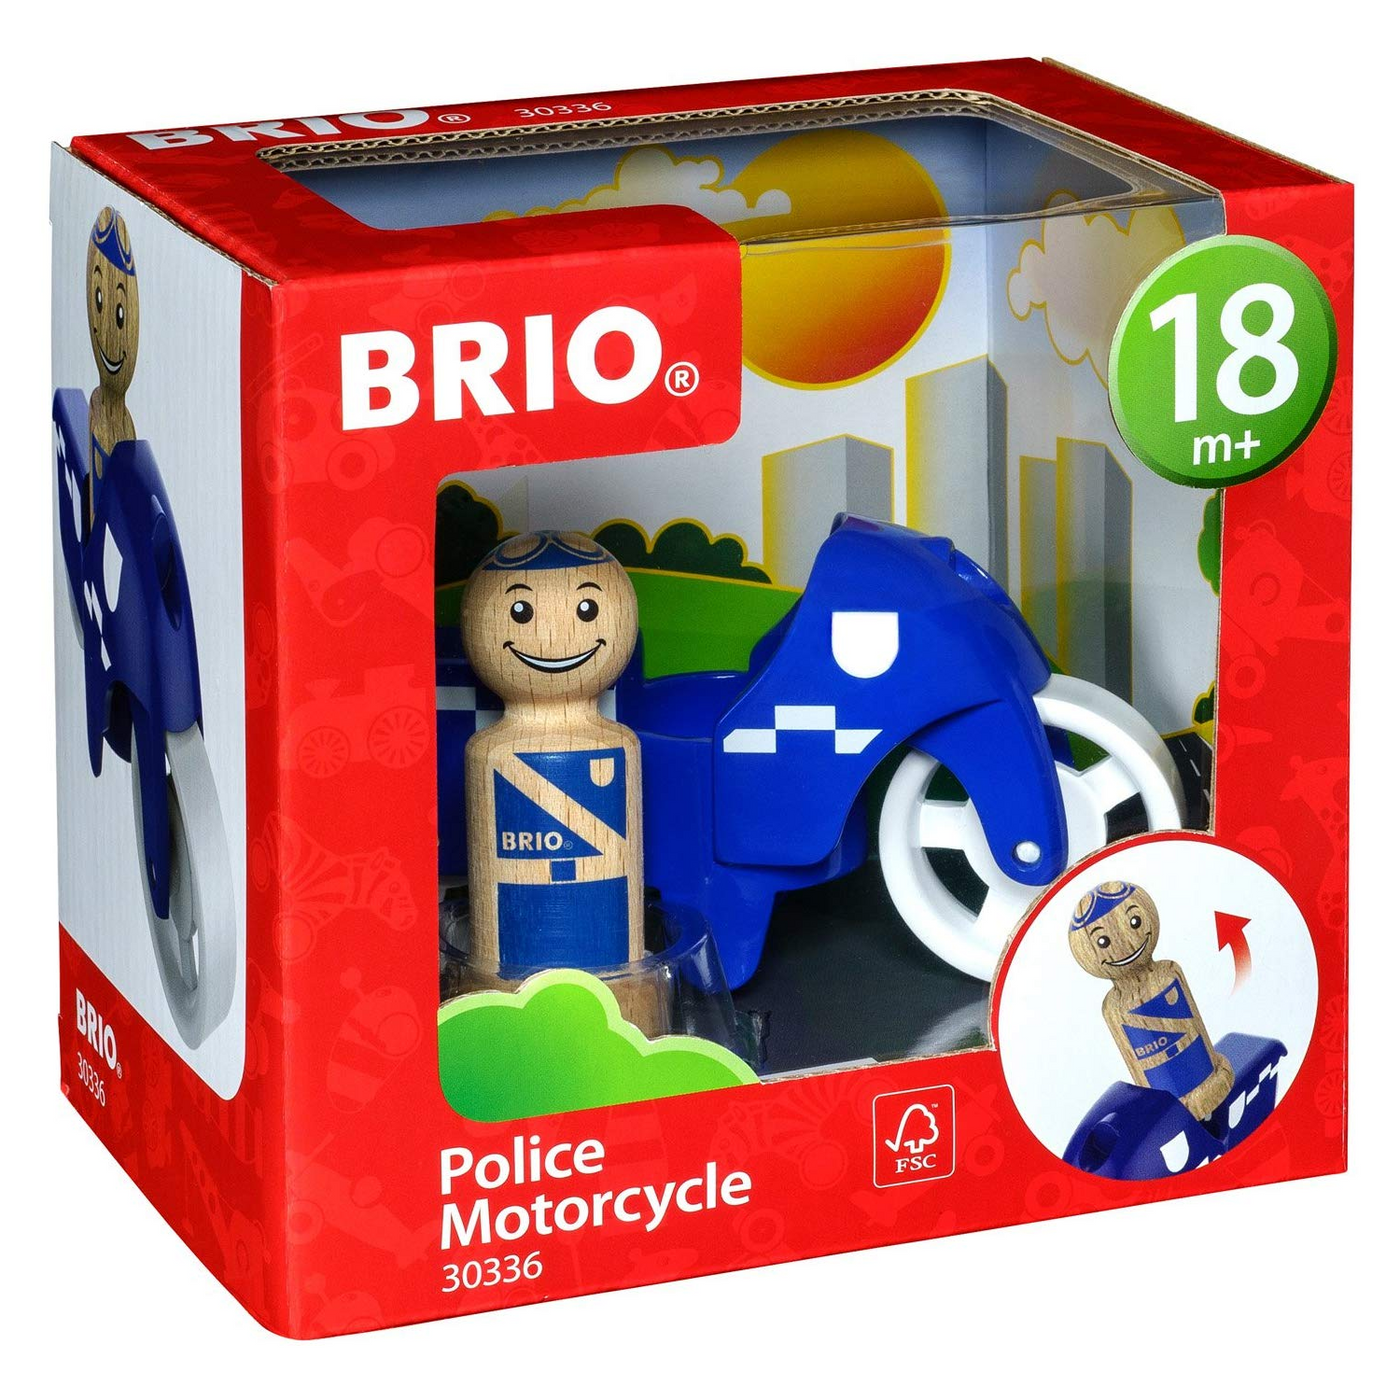 PLAYMOBIL City ACTION Play Set 5648 POLICE OFFICER & MOTORCYCLE